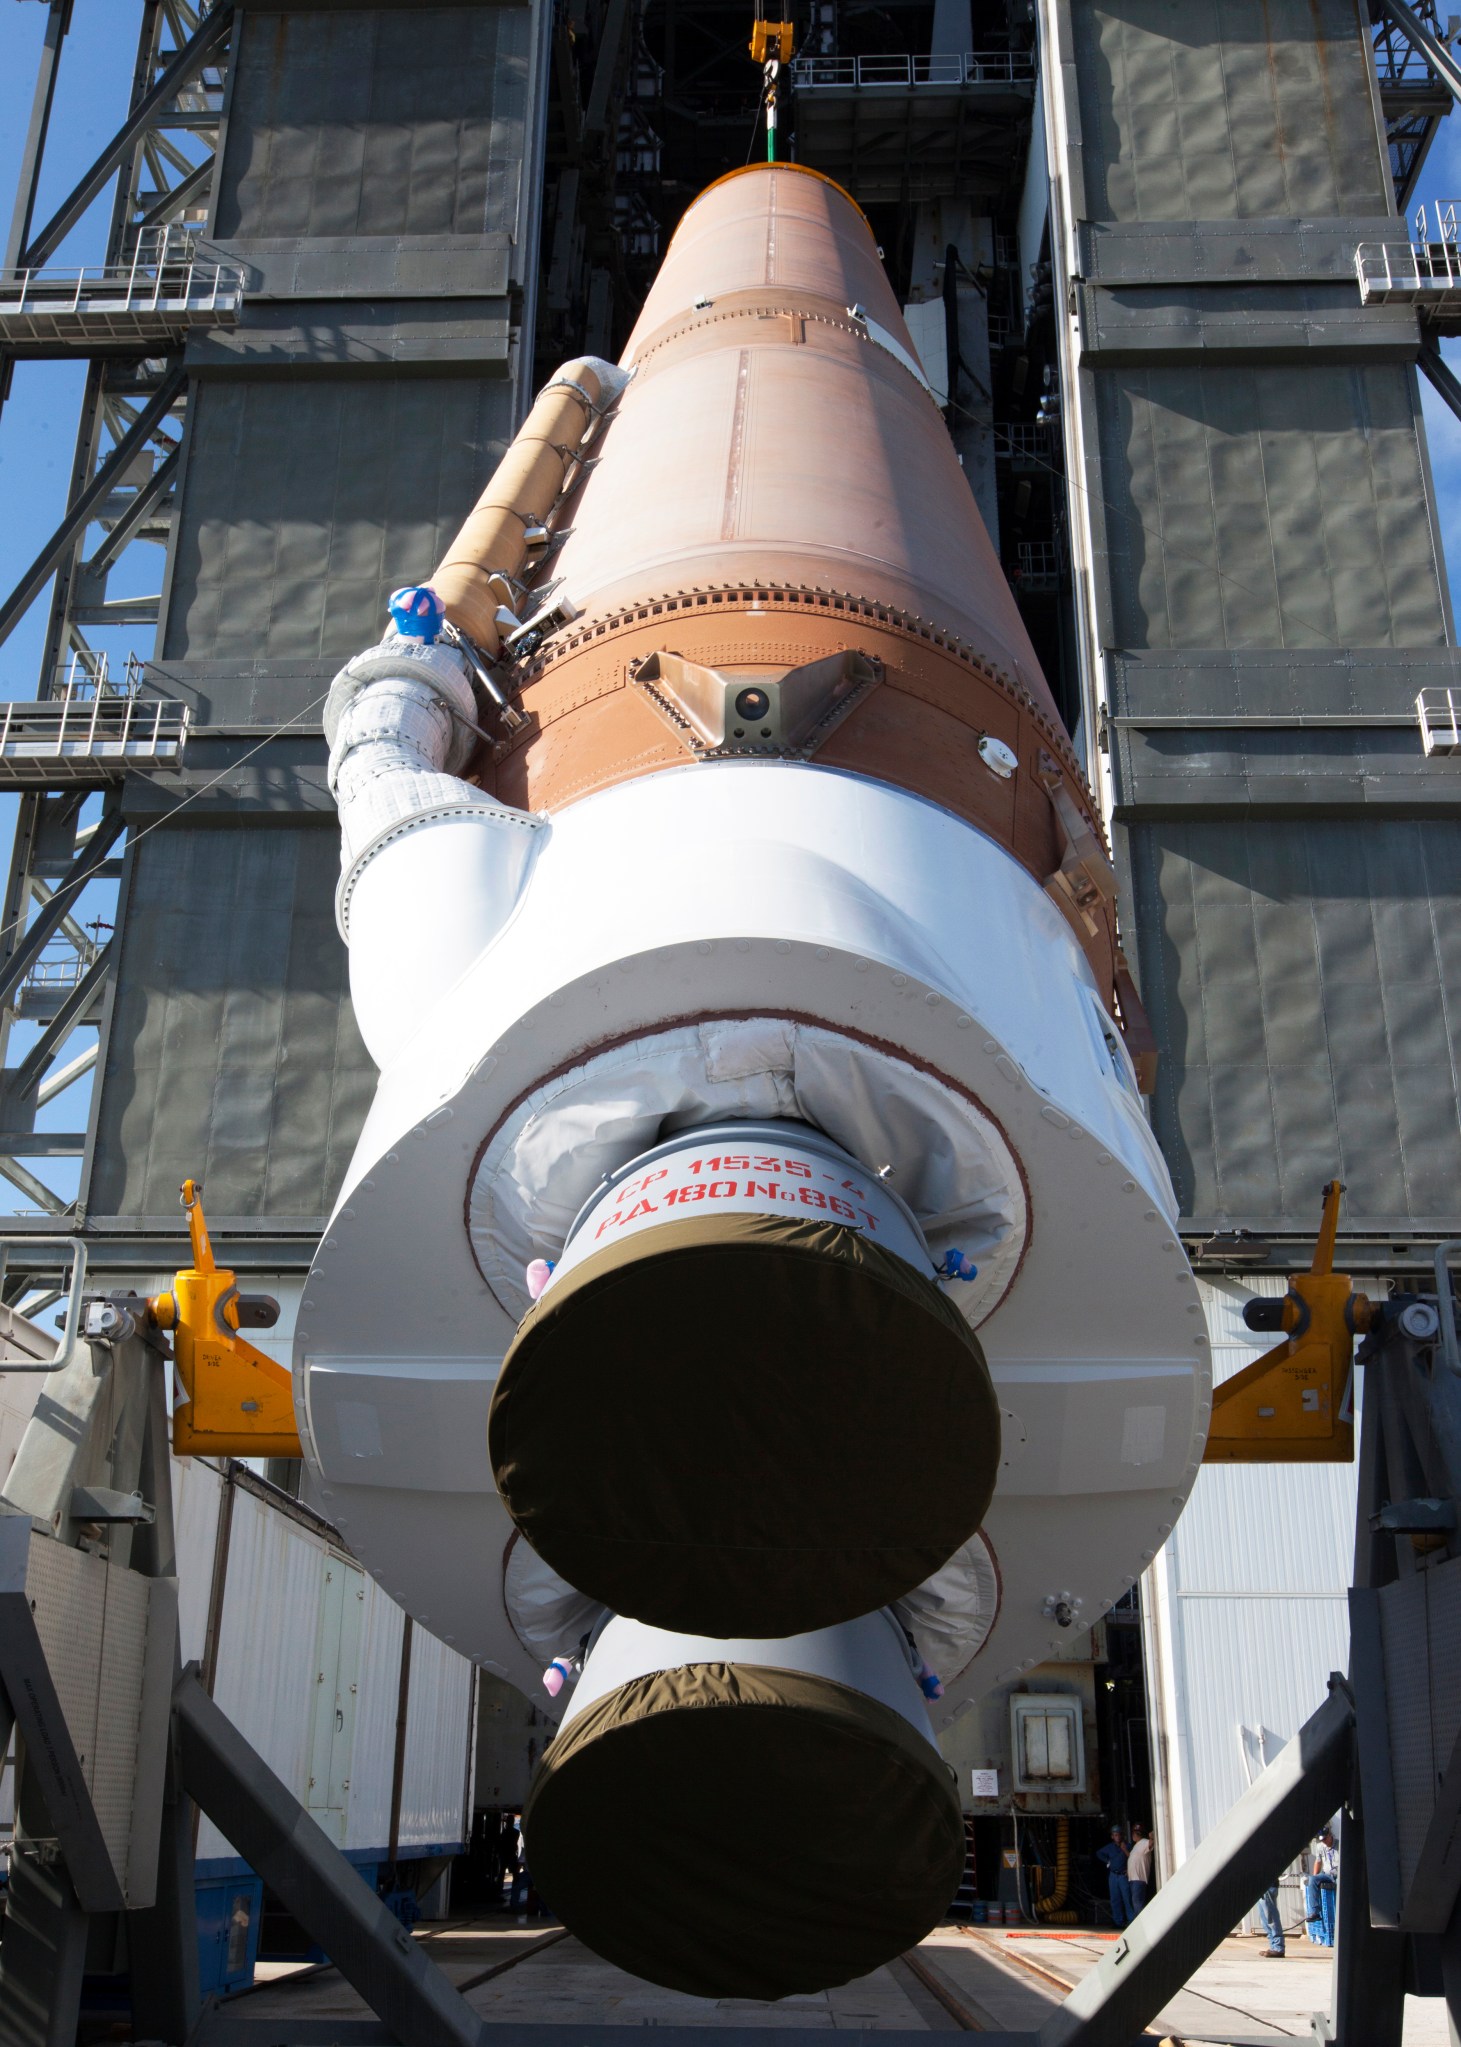 Atlas V first stage is lifted for TDRS-M